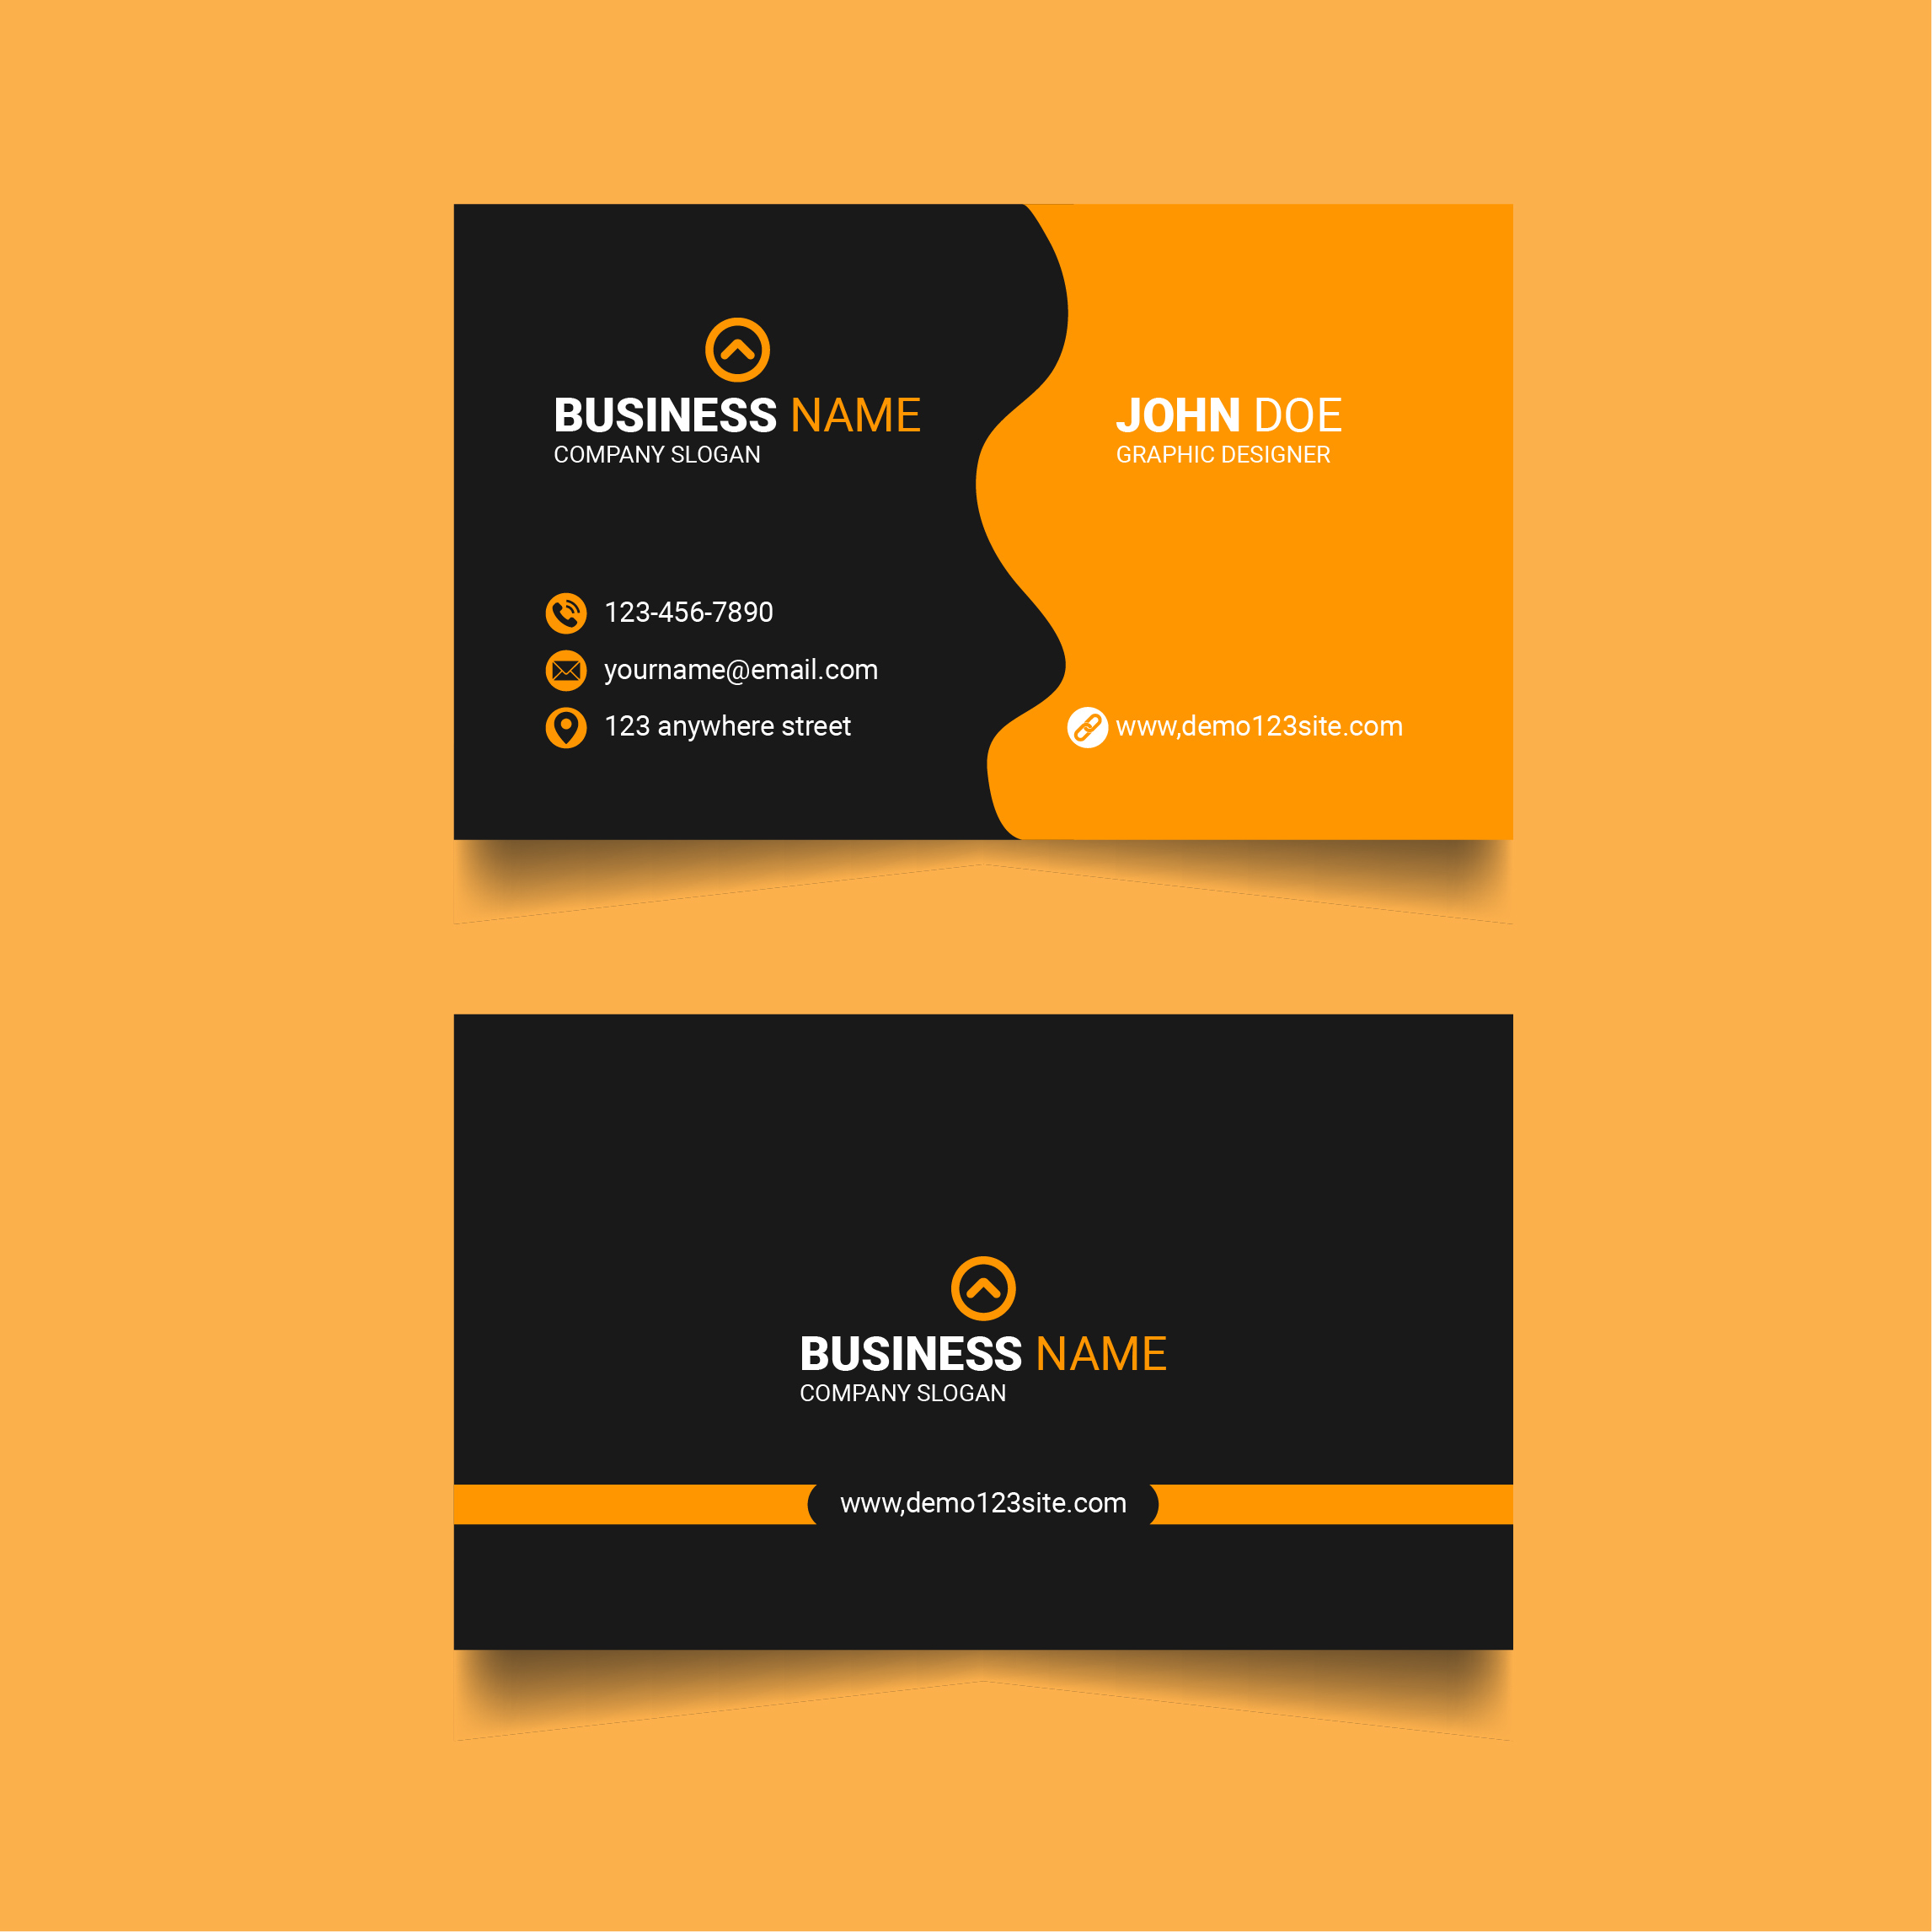 Creative Modern Orange and Black Business Card Design, Corporate Visiting Card cover image.